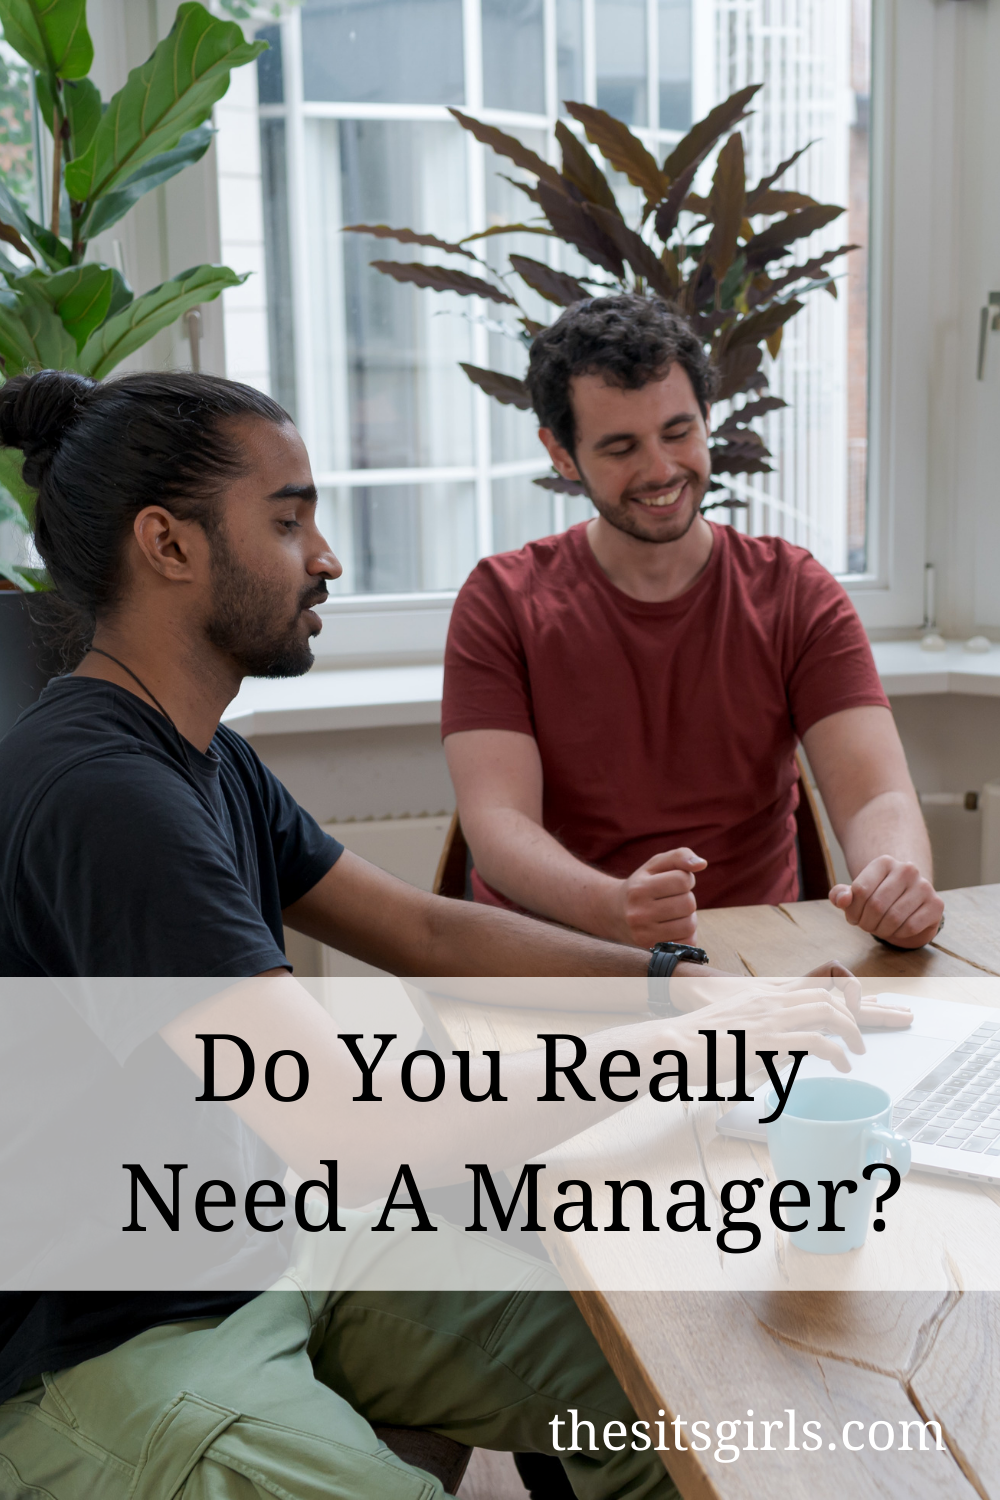 Do you really need a manager?